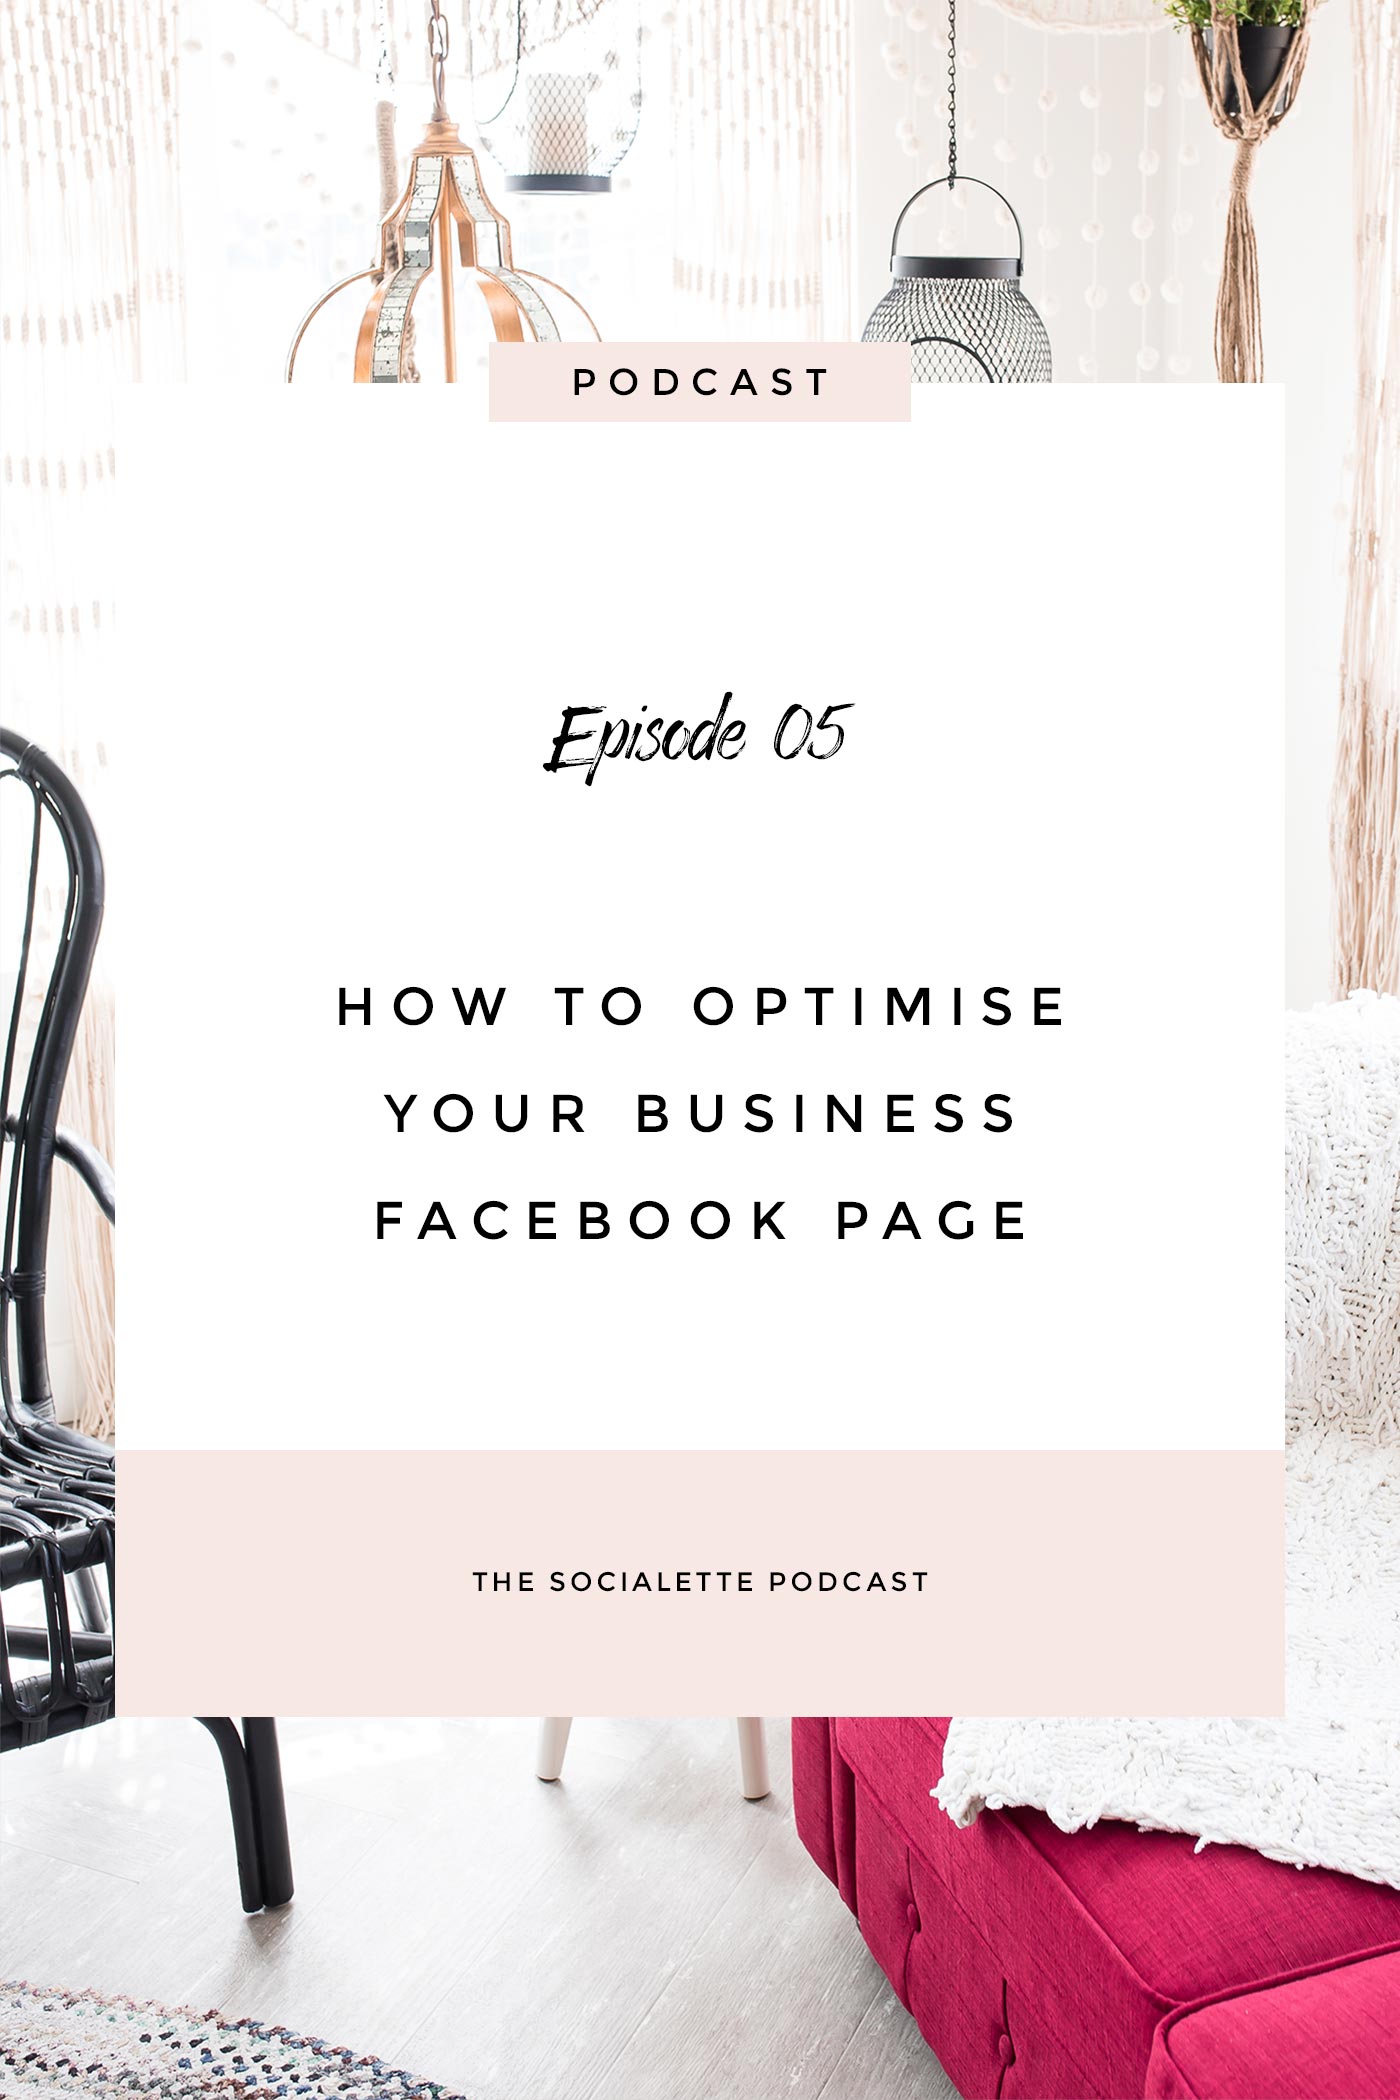 How to optimise my Facebook page